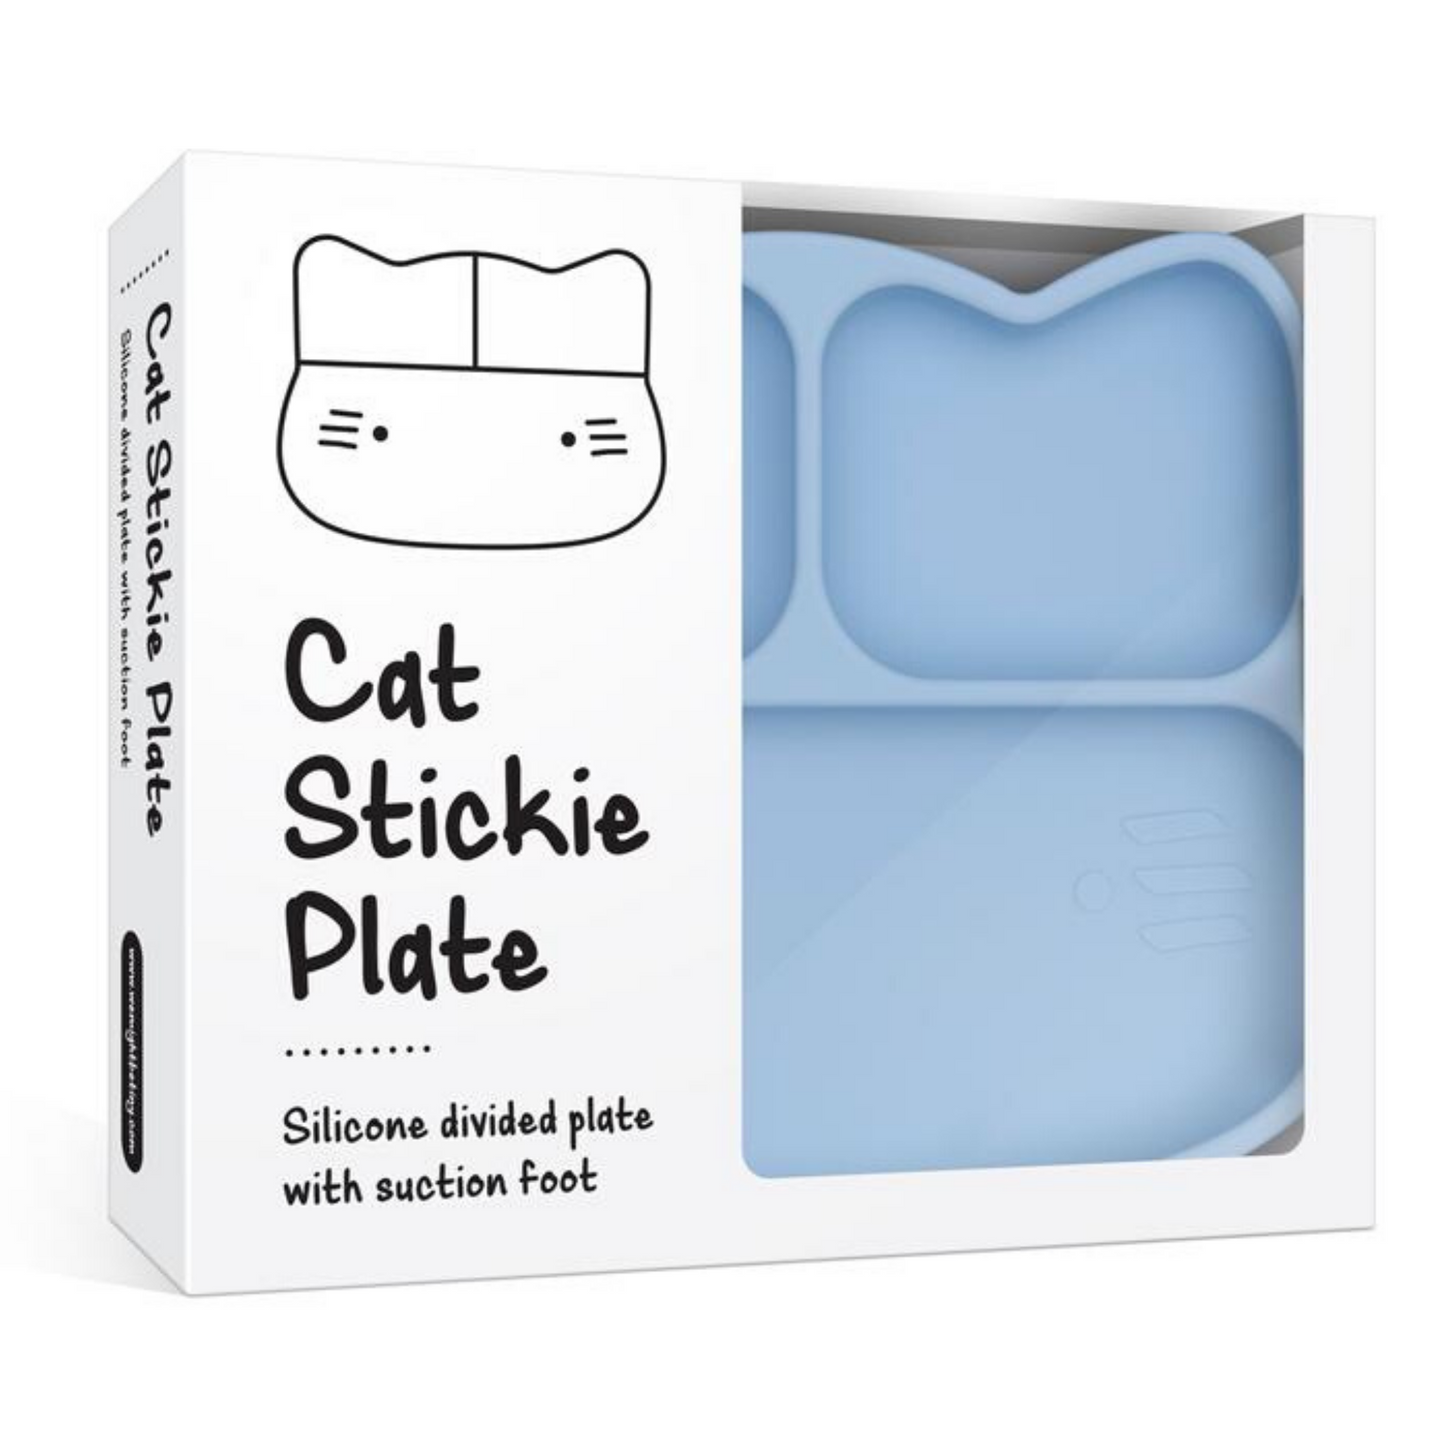 WE MIGHT BE TINY - Cat Stickie Plate | Powder Blue